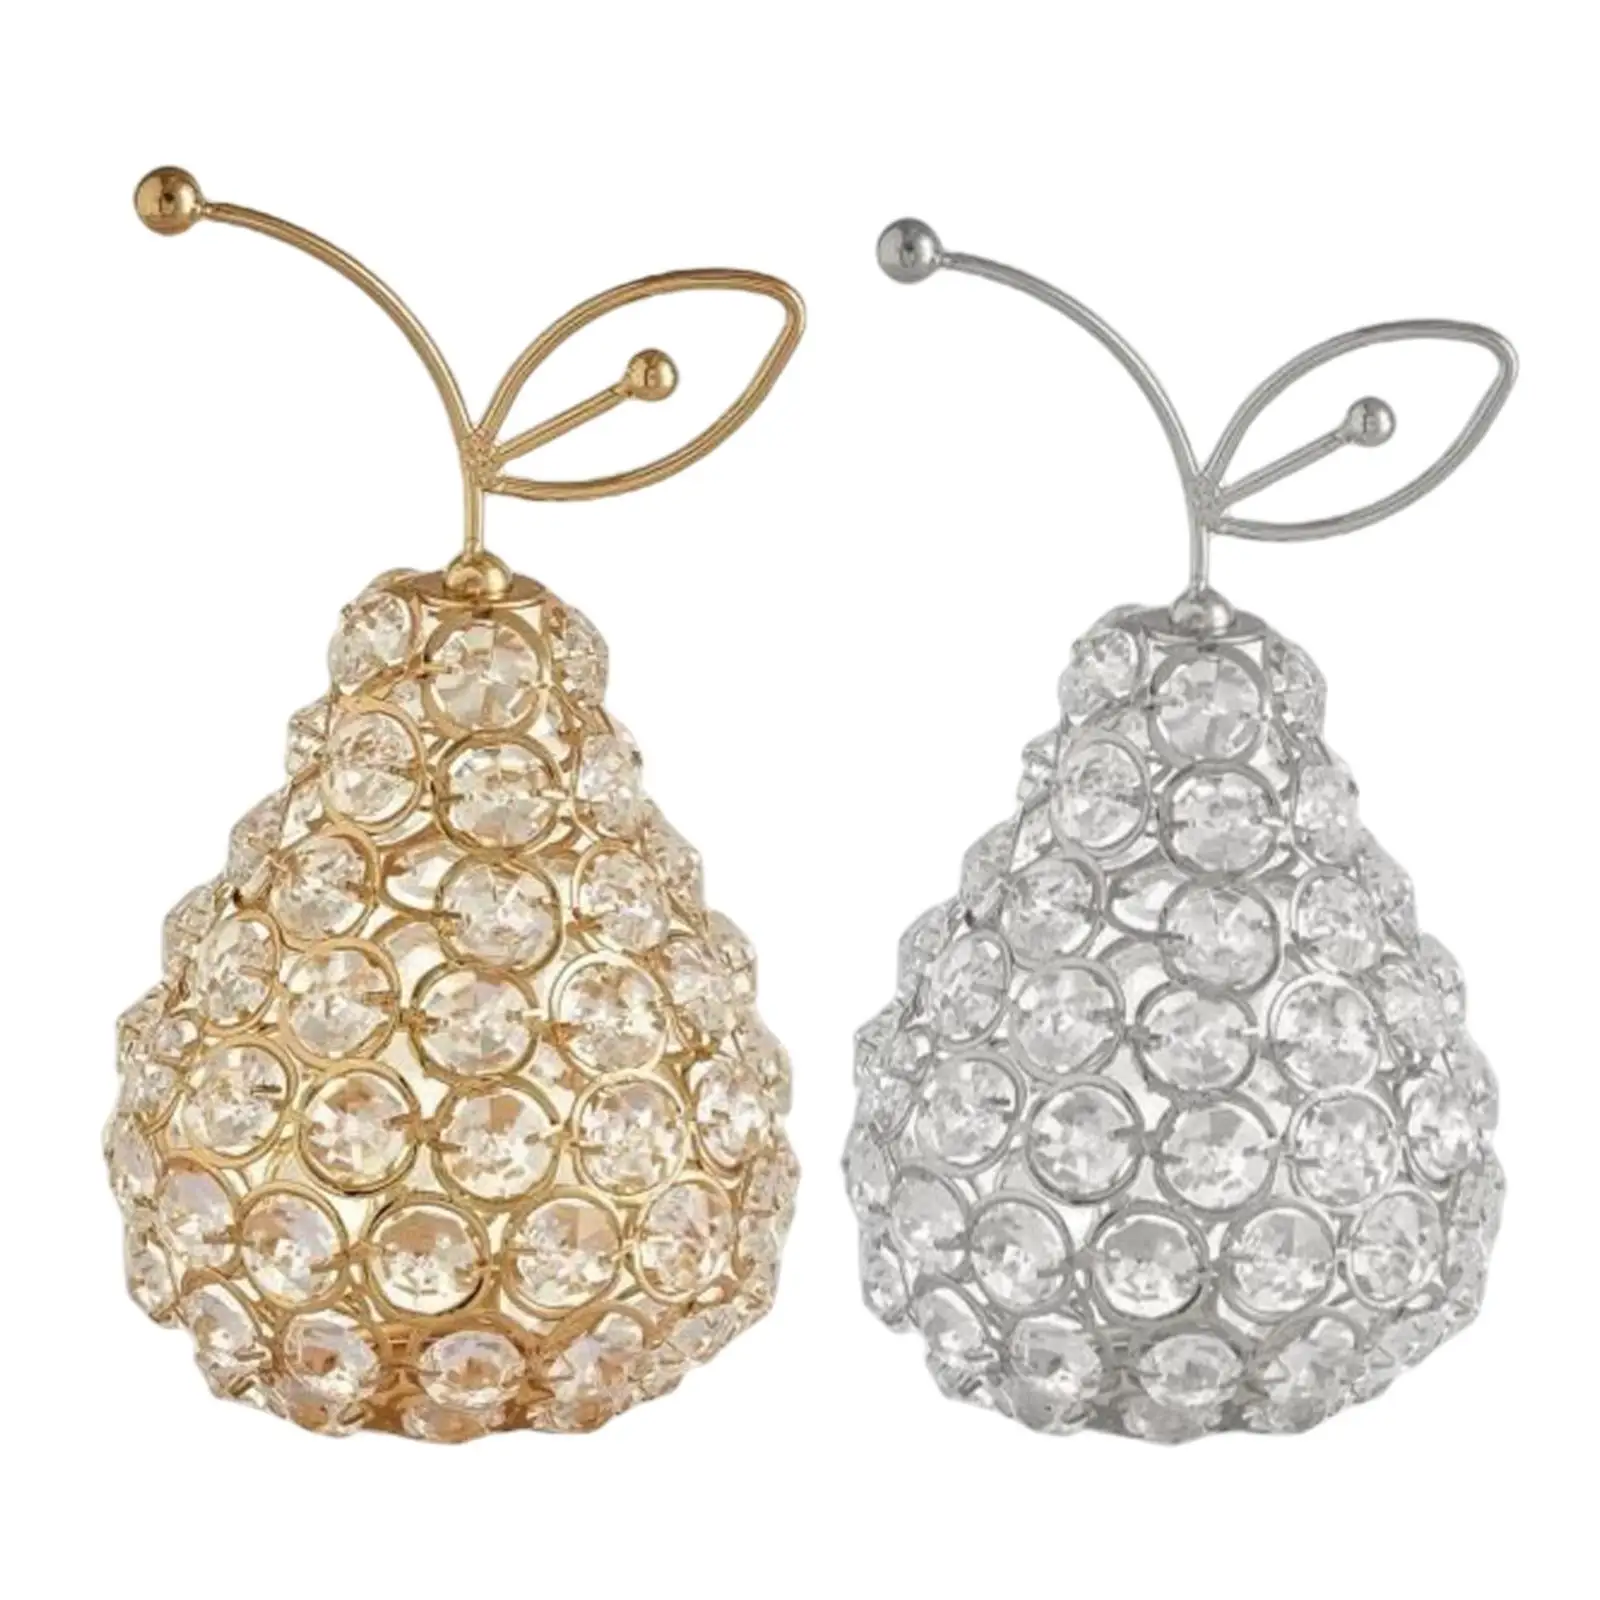 2-pack Glass Crystal Fruit Collectible Figurines Shiny Rhinestone Crystal Pear Home Decor Wedding Ornament